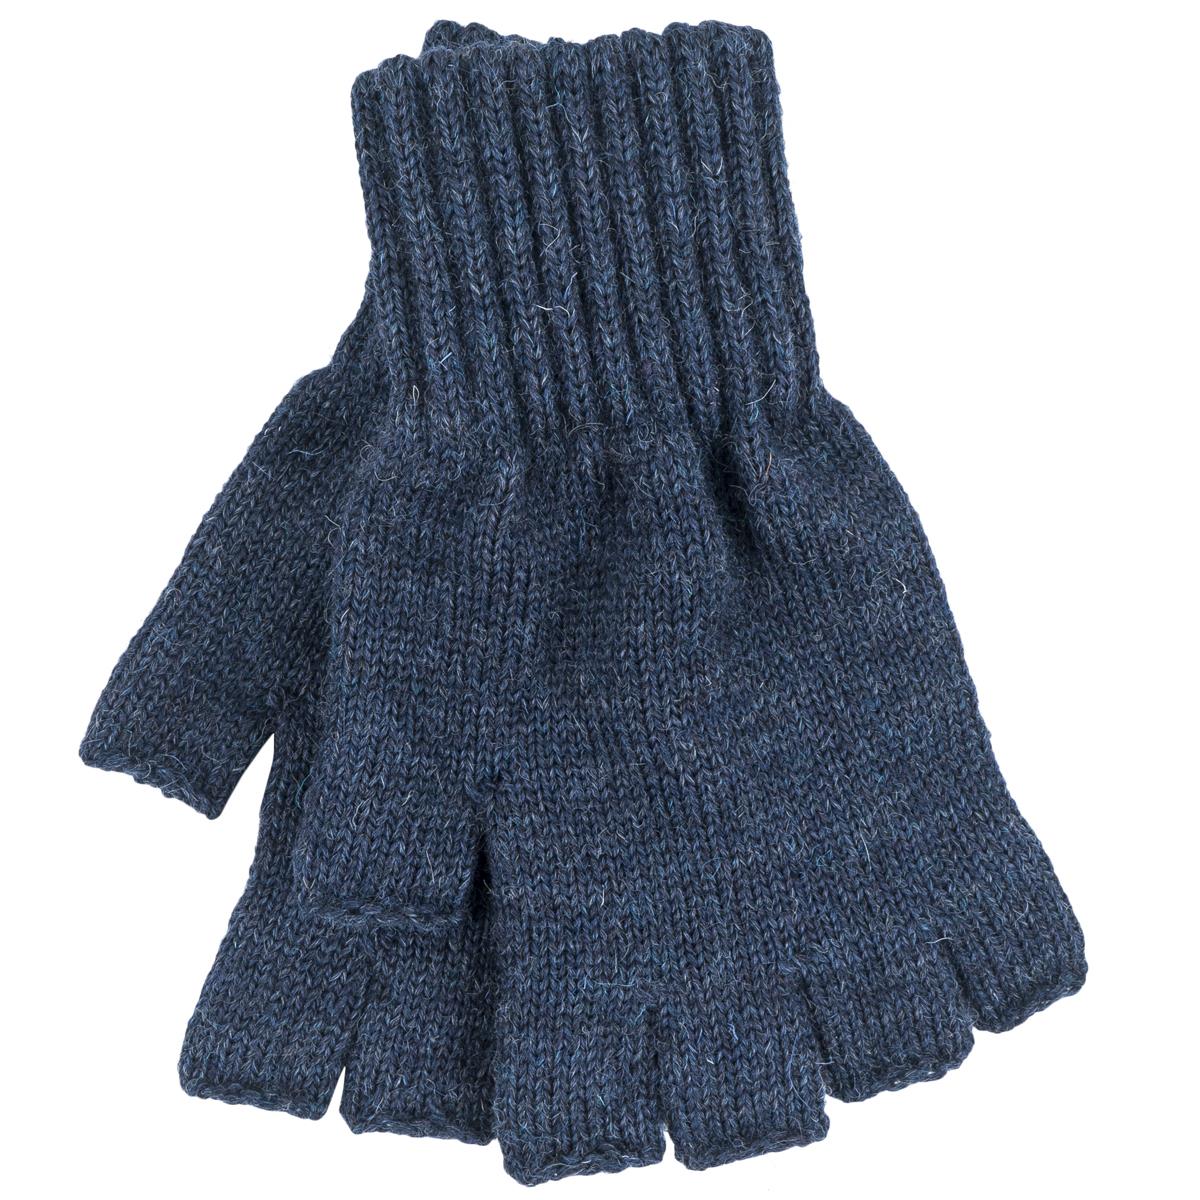 What does the ribbed cuff on Barbour fingerless gloves provide?